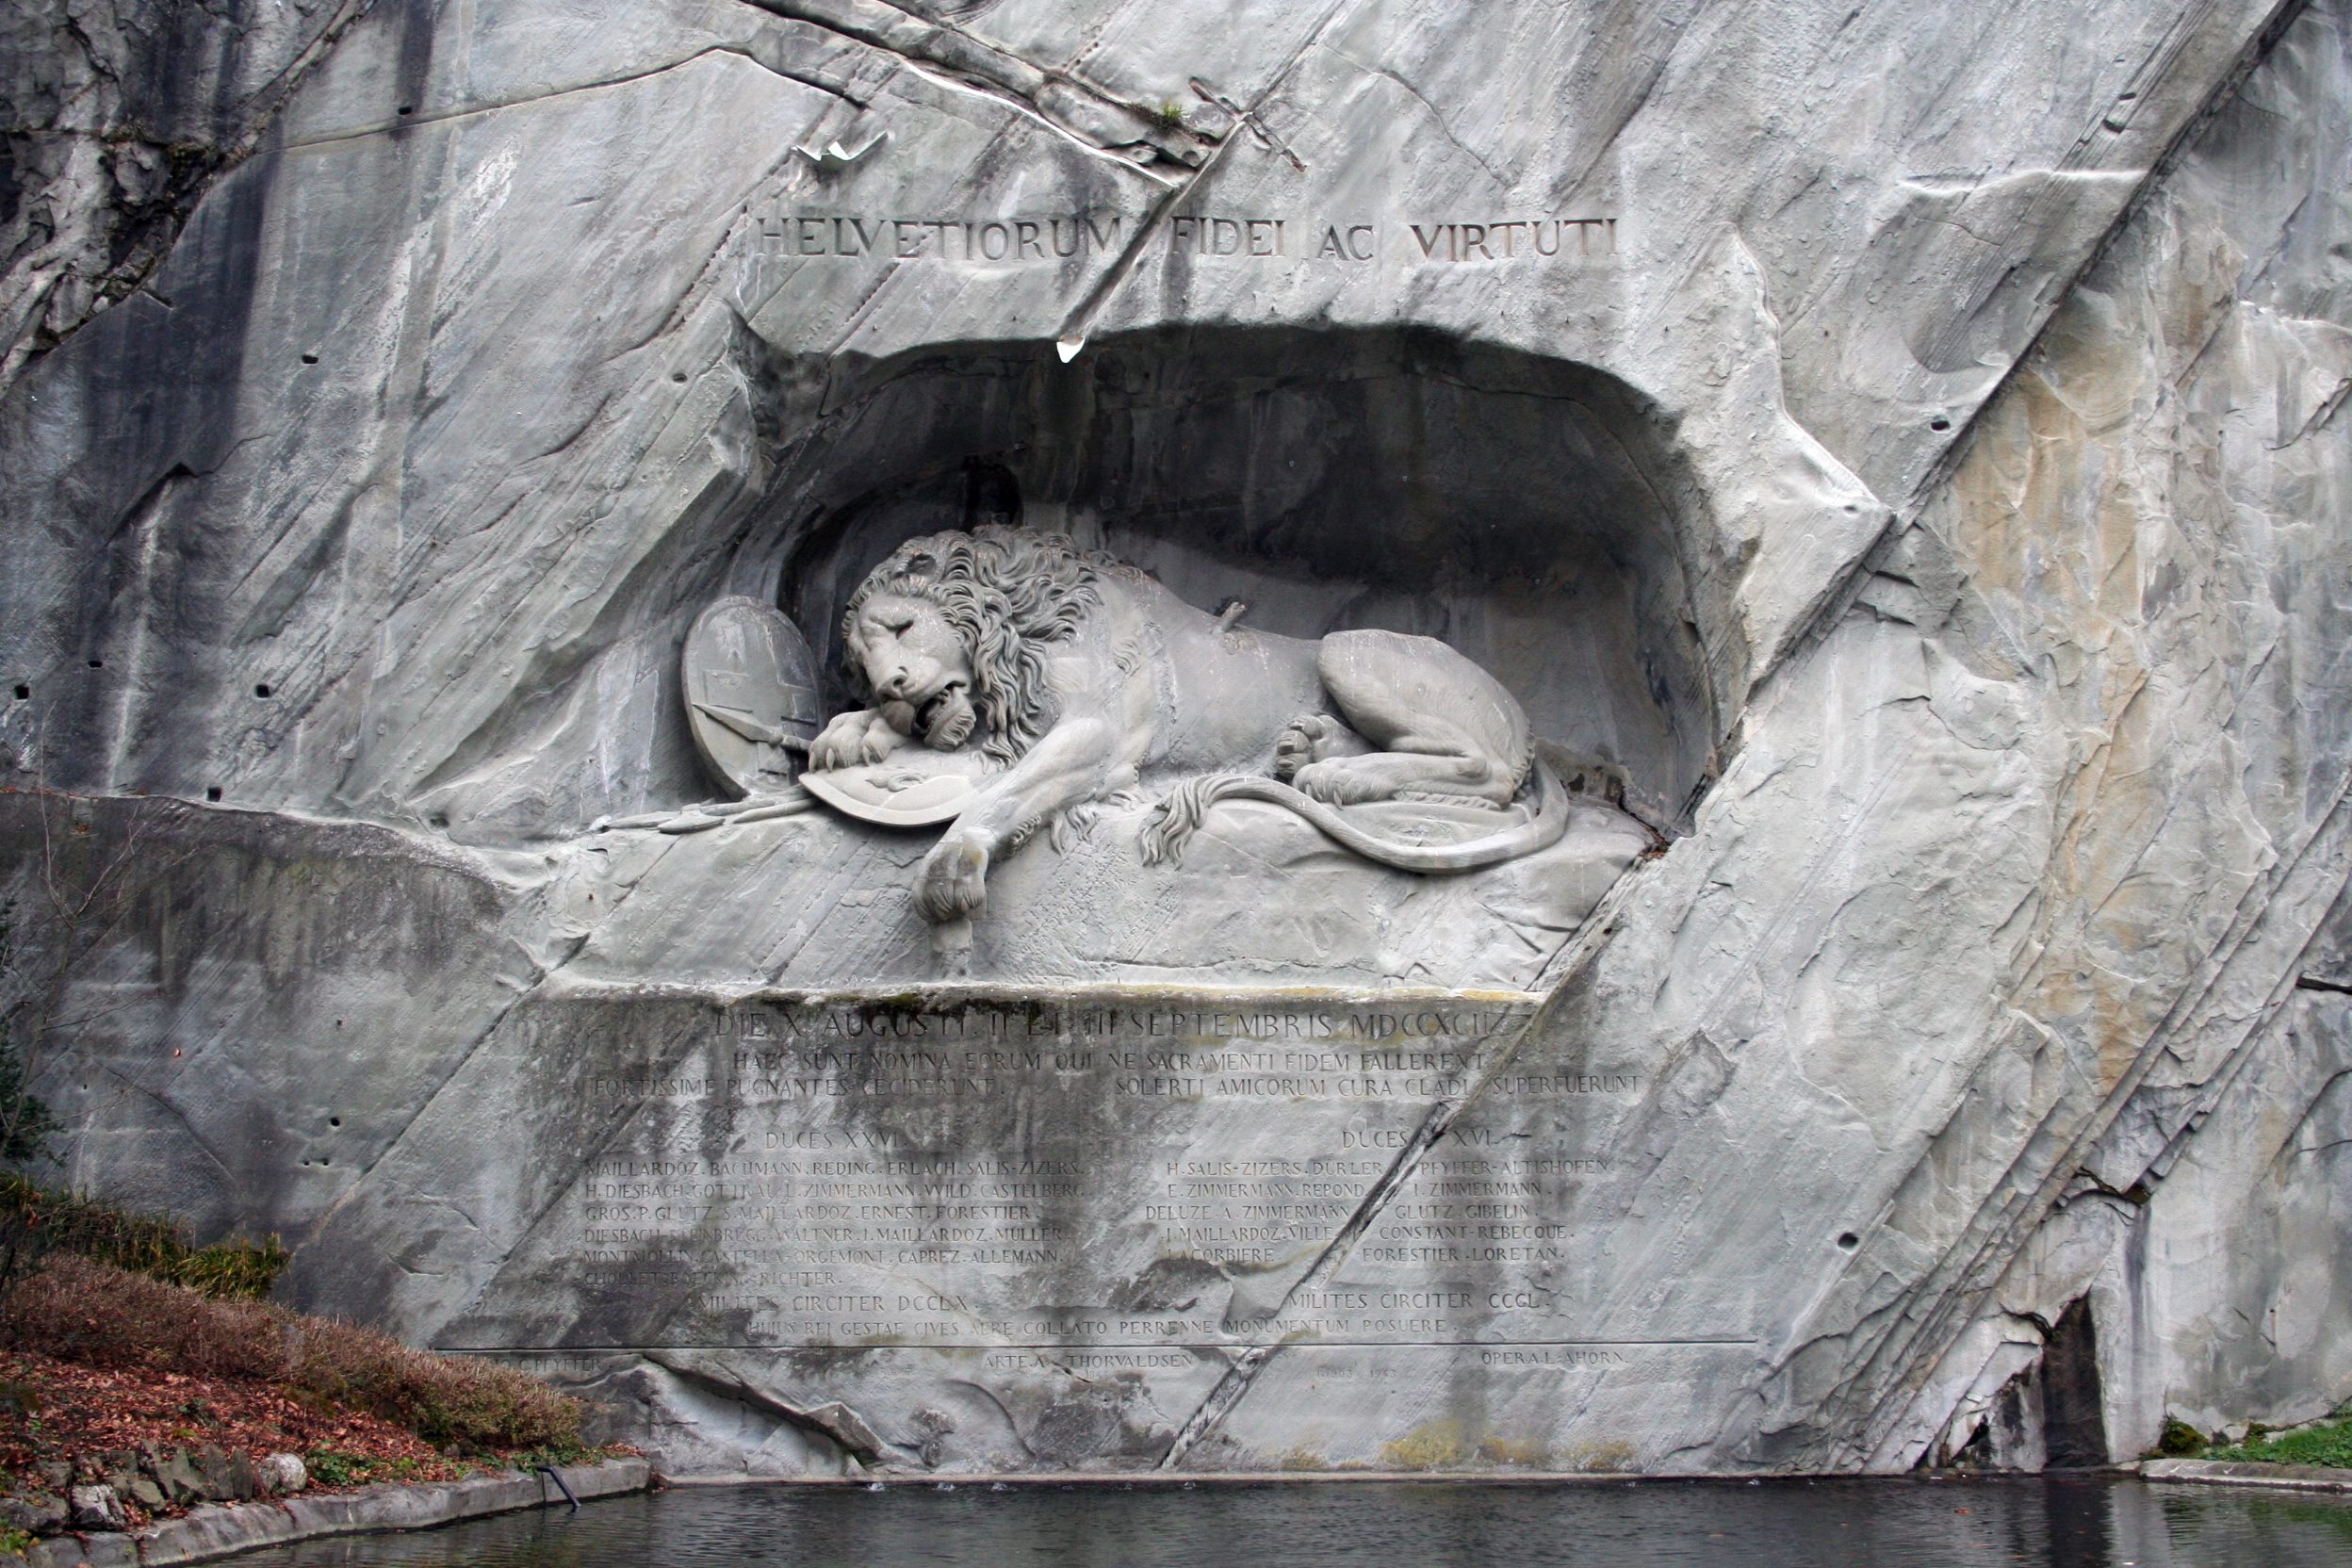 The_Lion_Monument_in_Luzern_23.12.2006.jpeg